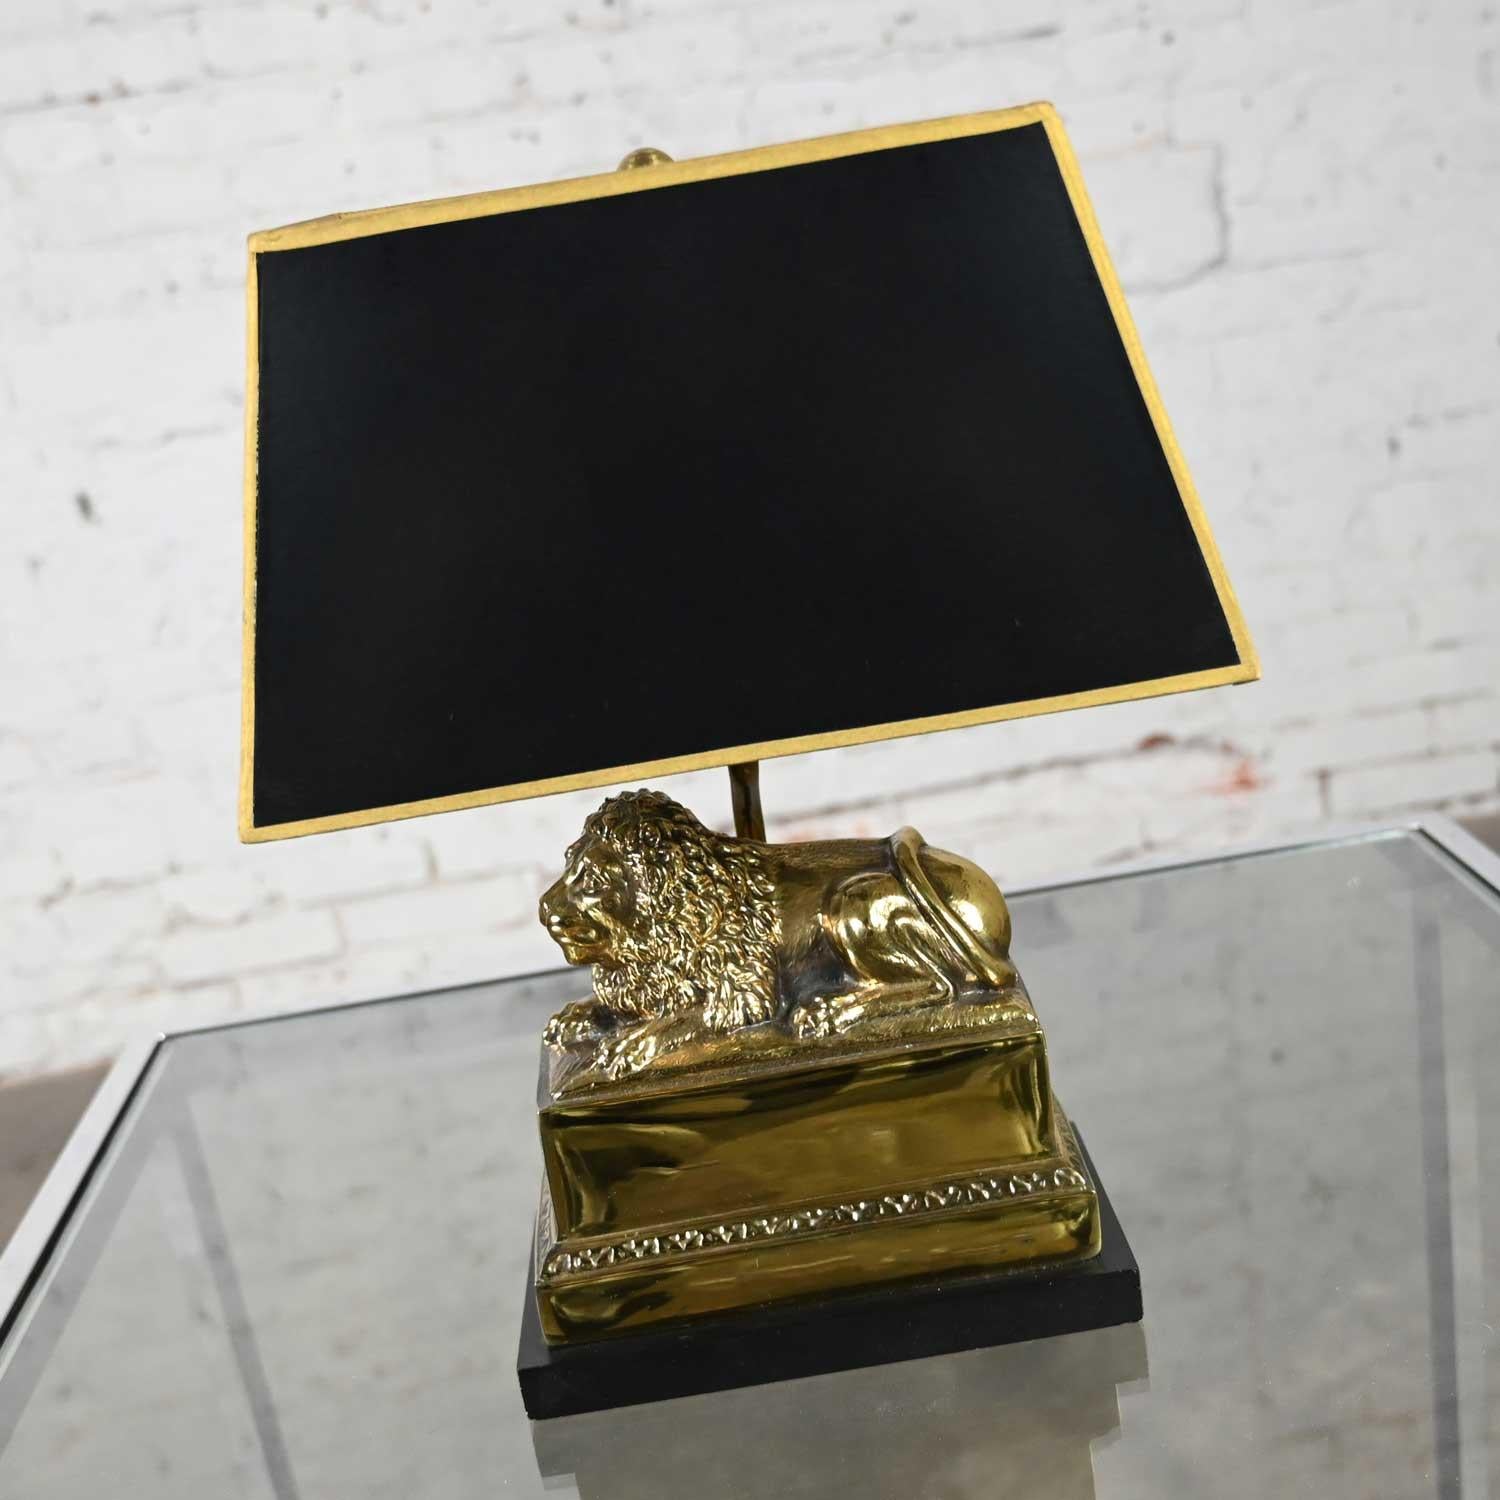 Neoclassical Revival Vintage Neoclassic Brass Lion Low Desk Lamp Rectangular Black Shade For Sale